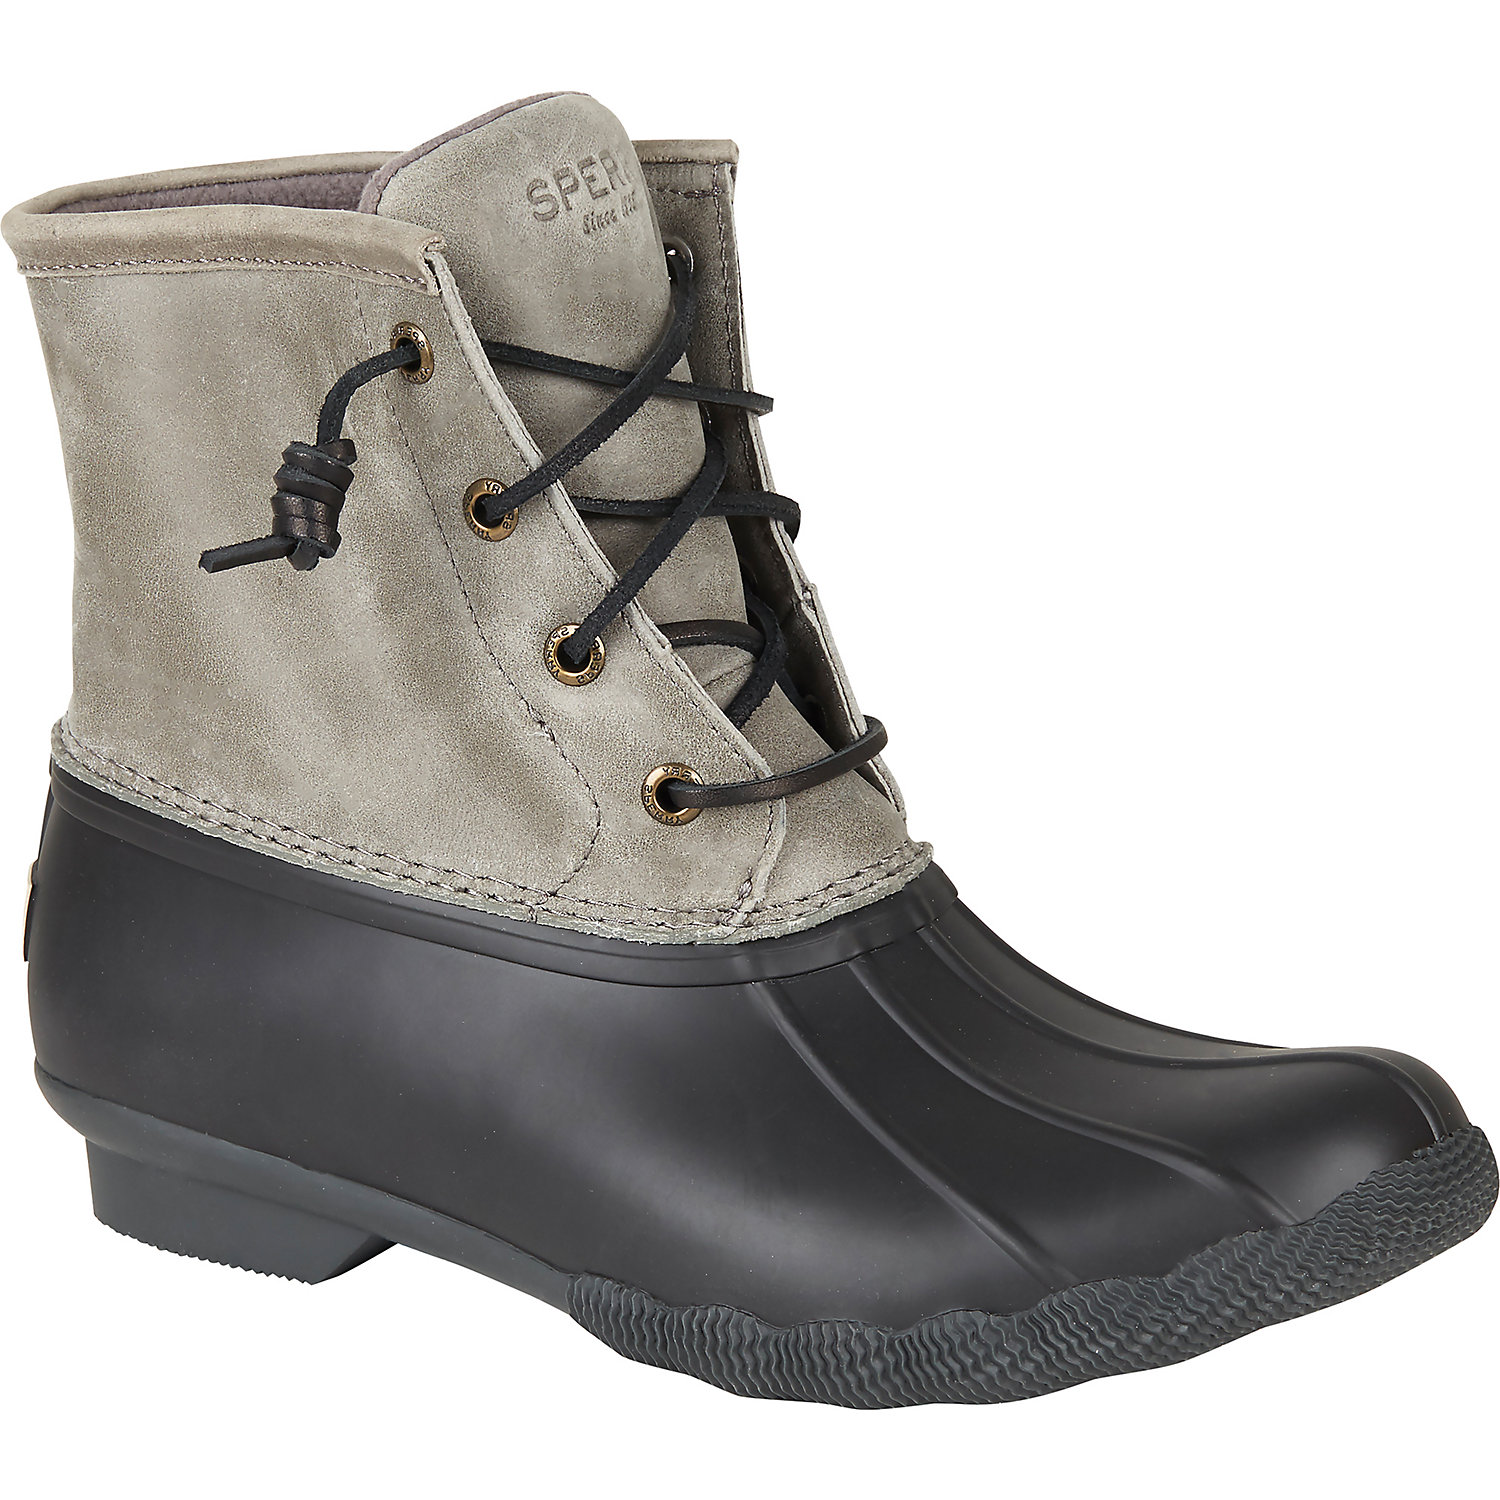 Sperry Womens Saltwater Boot